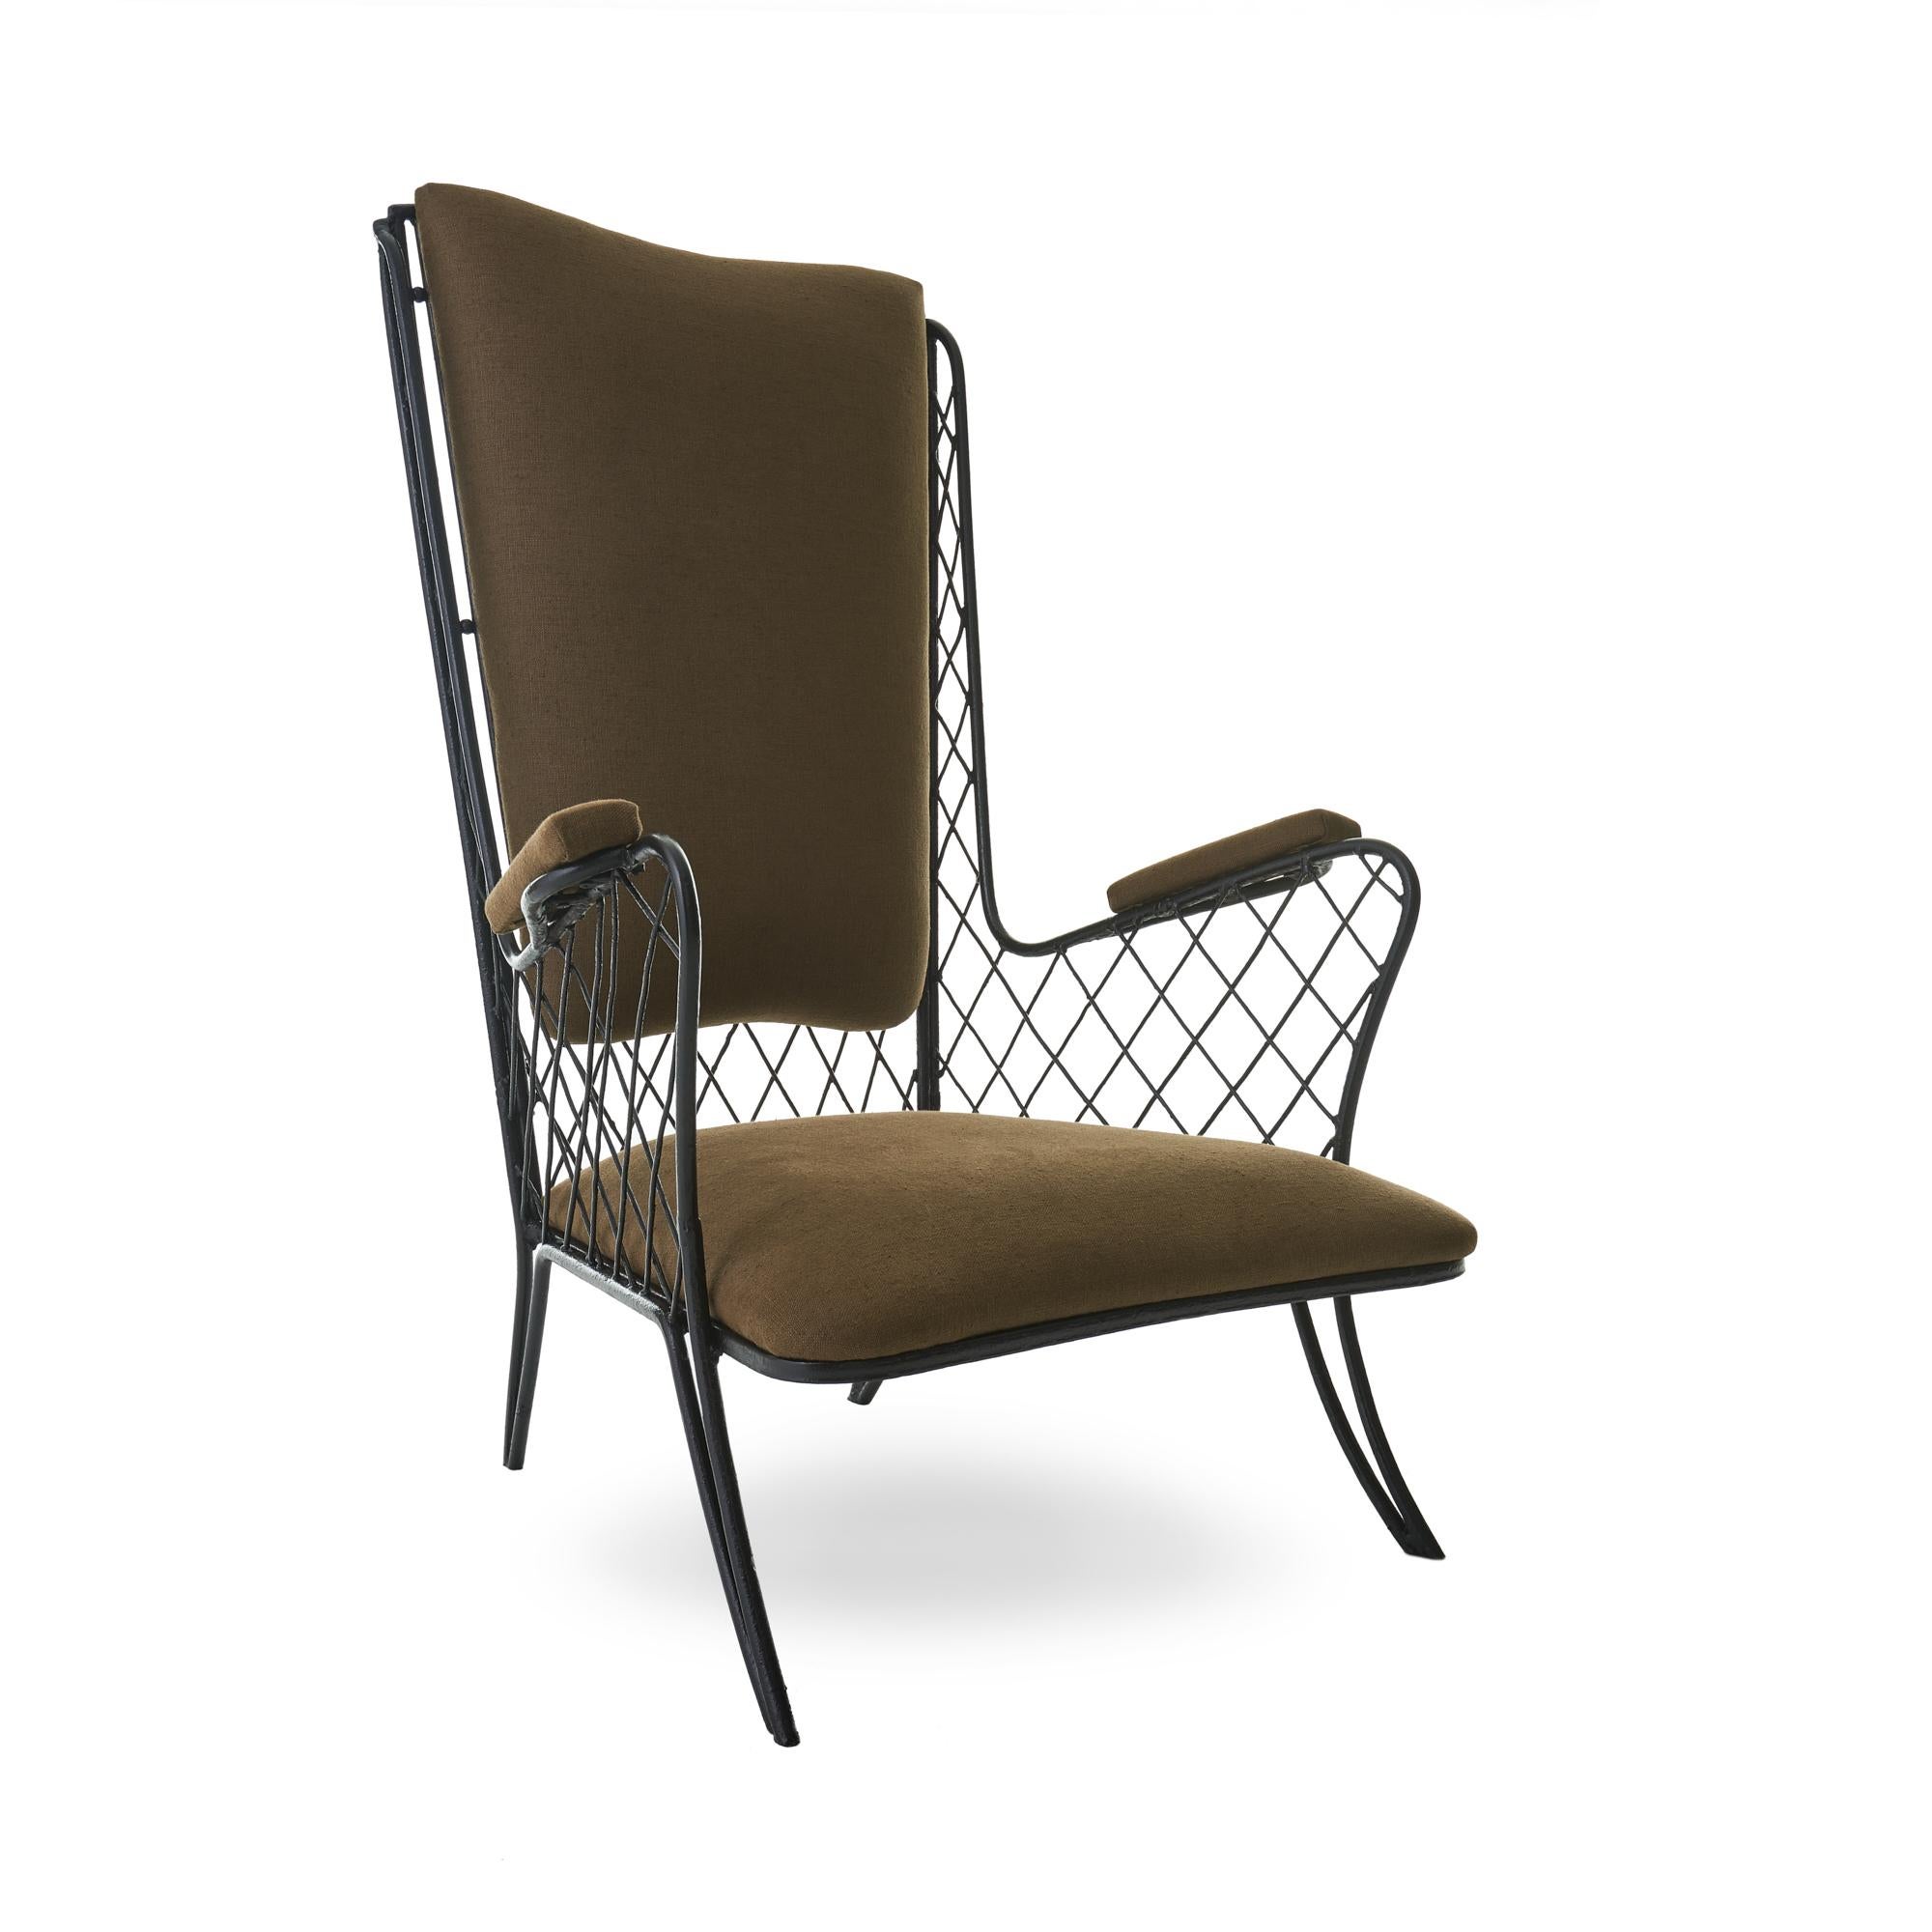 Elegant 1950s pair of low slung armchairs attributed to Jean Royère. Delicate iron latticework has been repaired and repainted, reupholstered with an earthen brown linen. 

Measures: 25” D x 27” W x 40.5” H, 12” seat height.